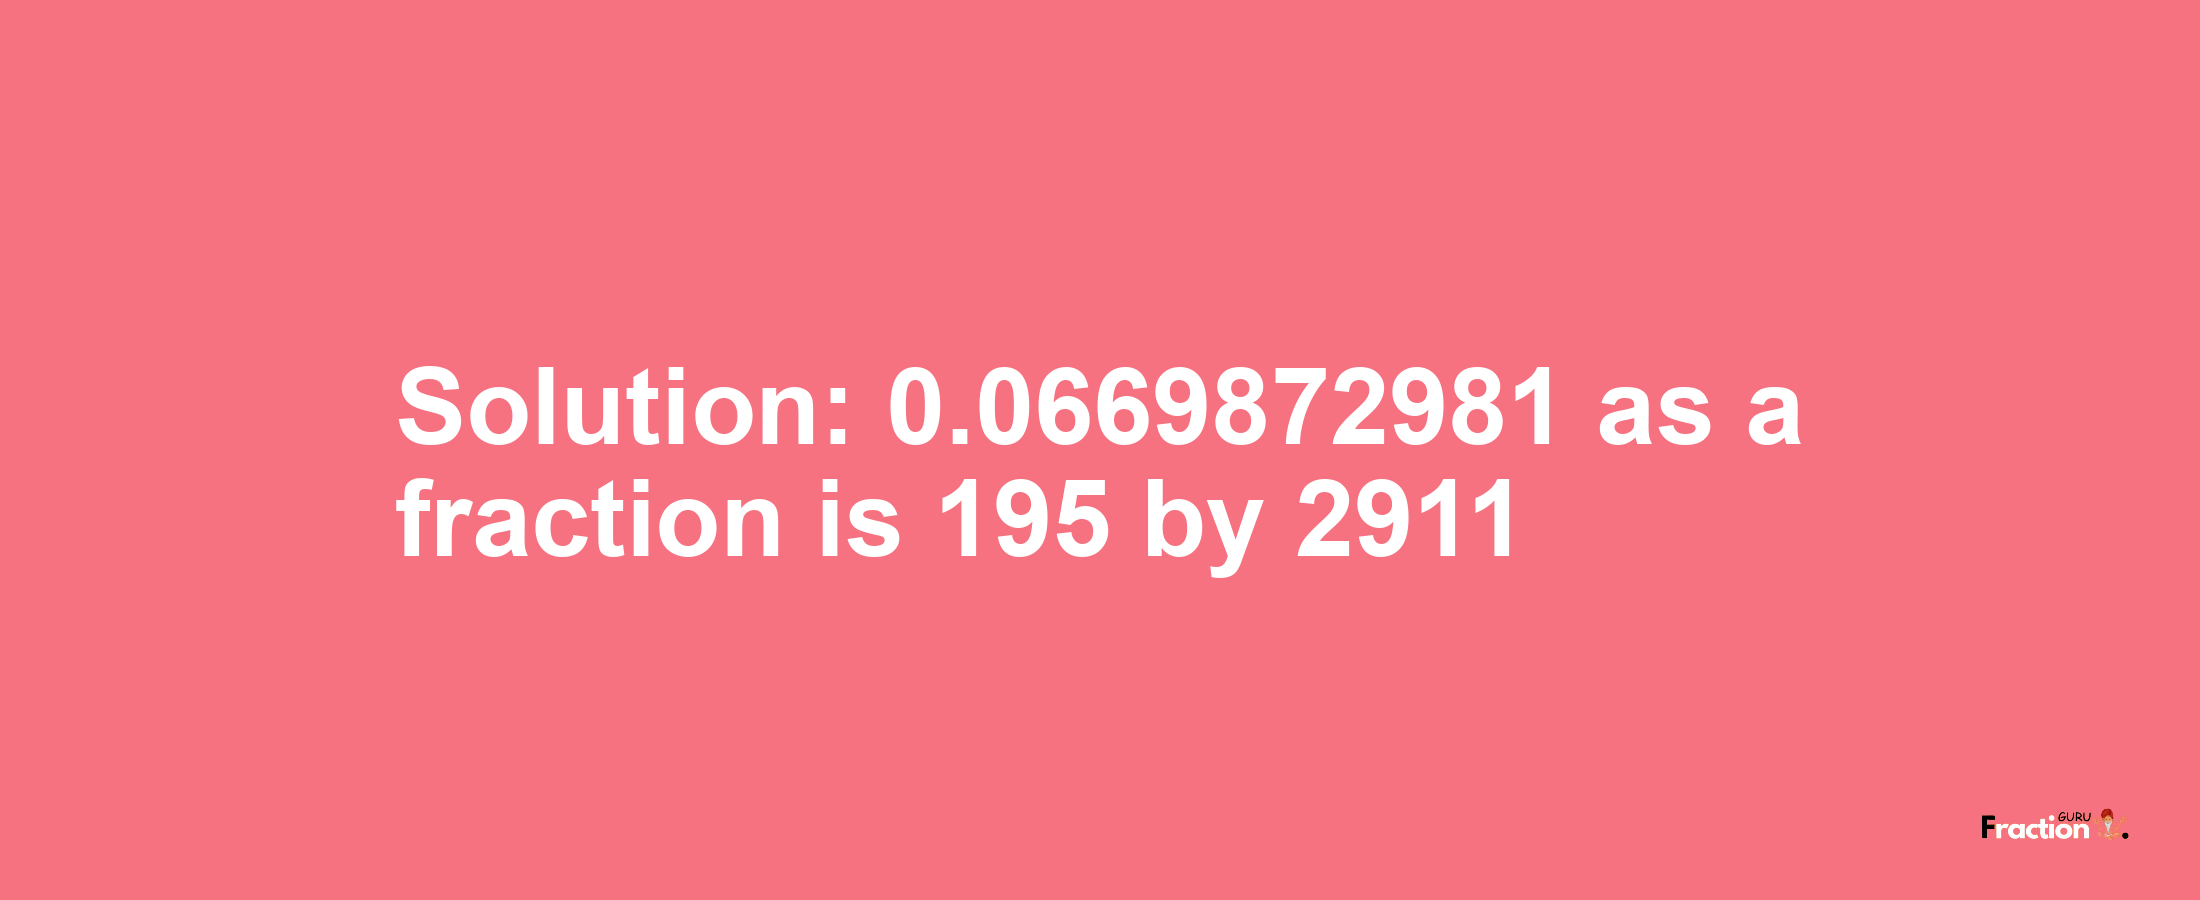 Solution:0.0669872981 as a fraction is 195/2911